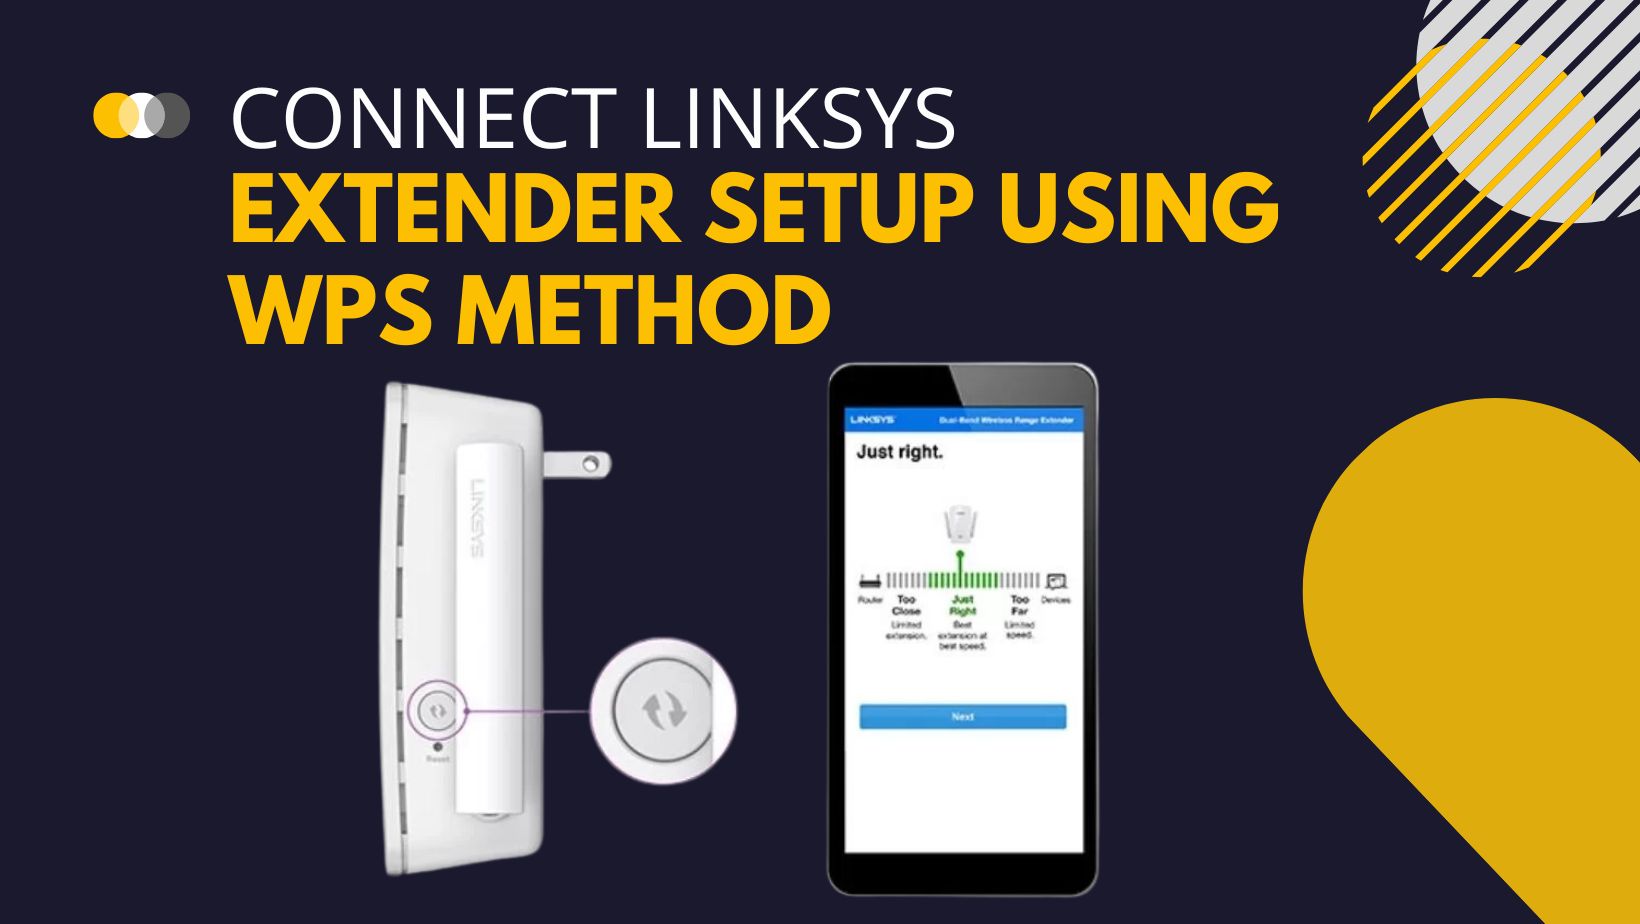 How to Connect Linksys Extender Setup using WPS Method